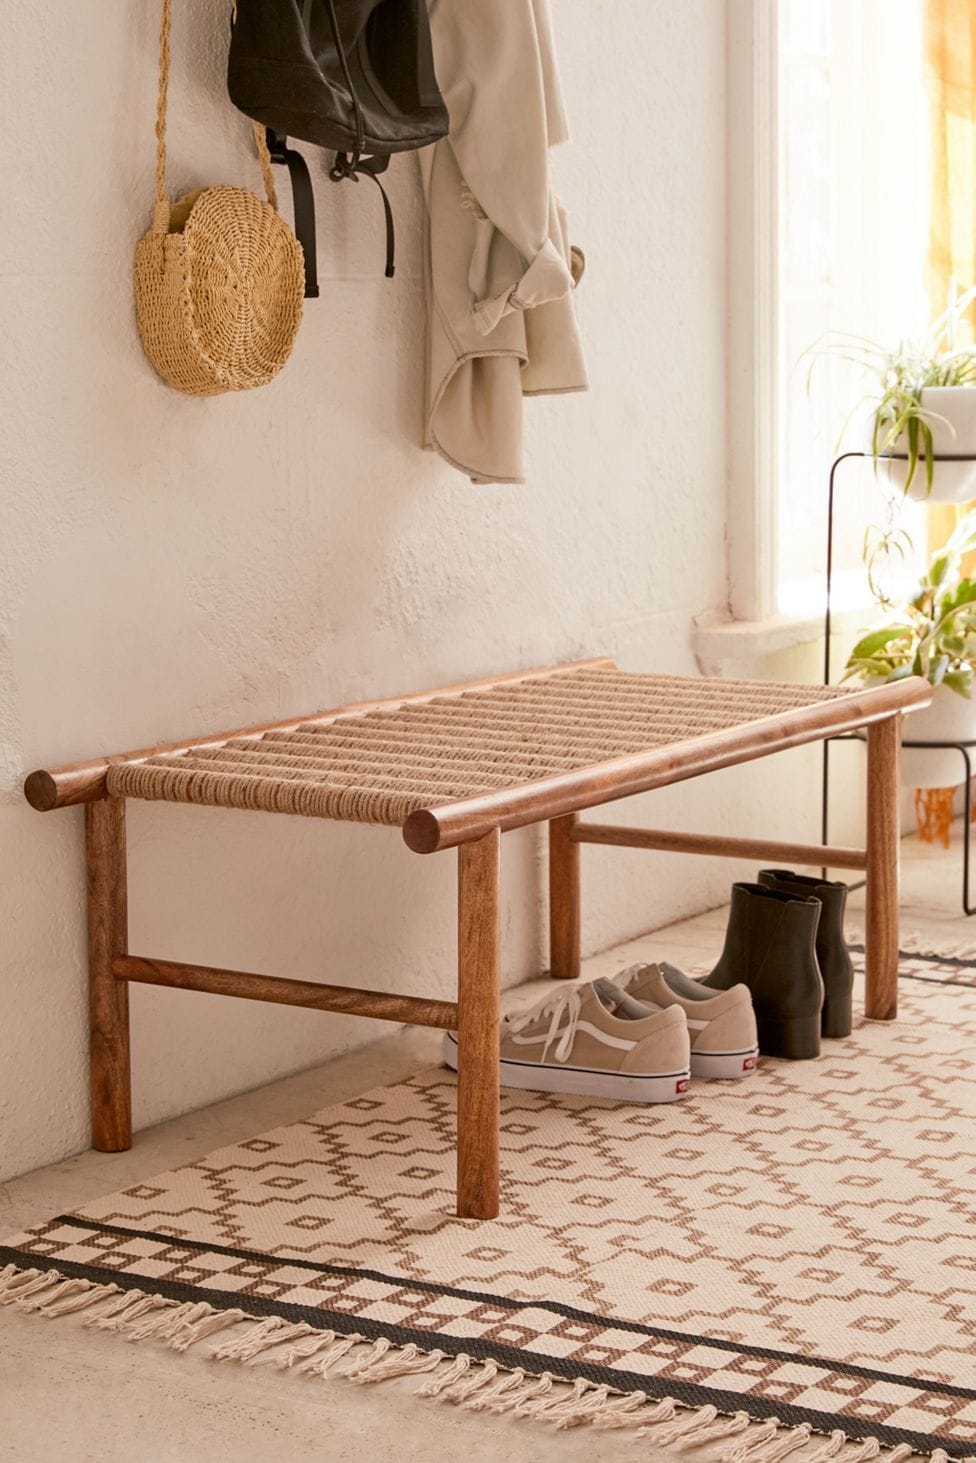 Create a Foyer with a Bench